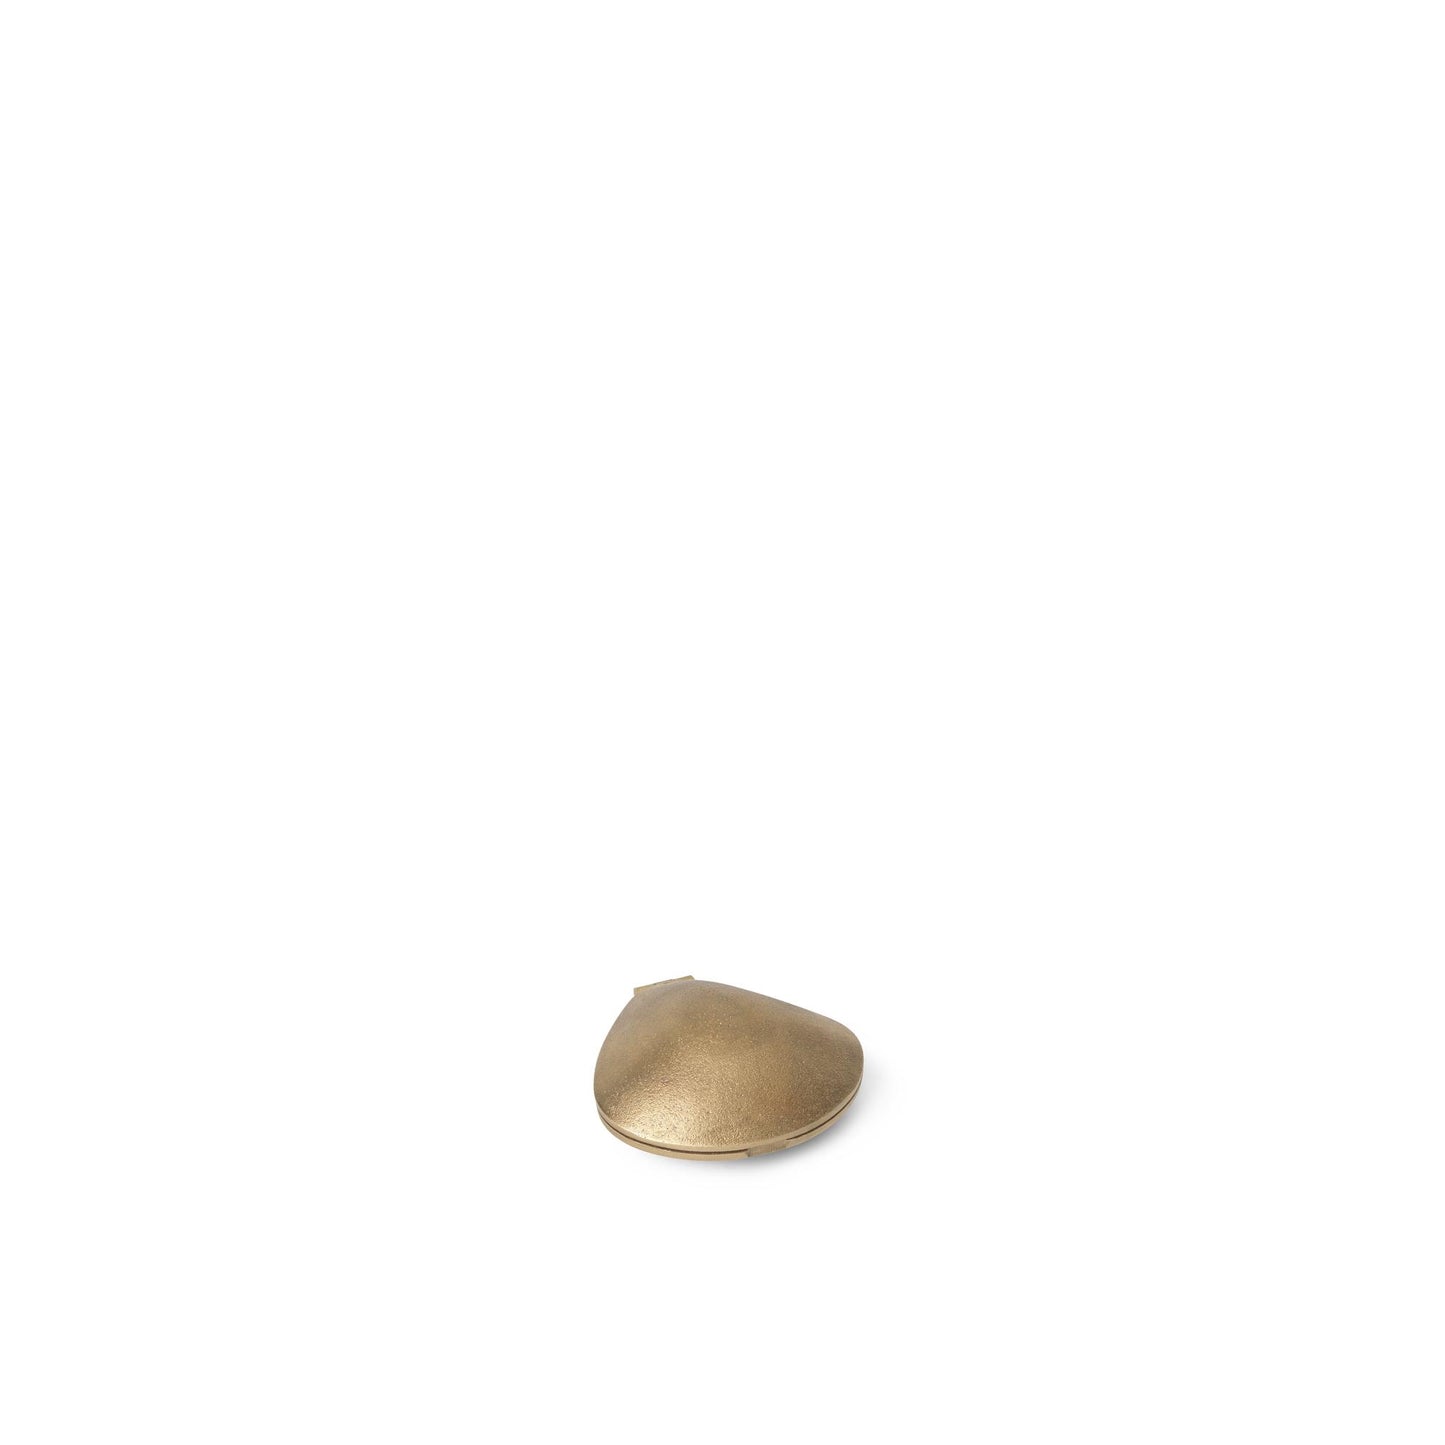 Clam Candlestick by Ferm Living #Brass